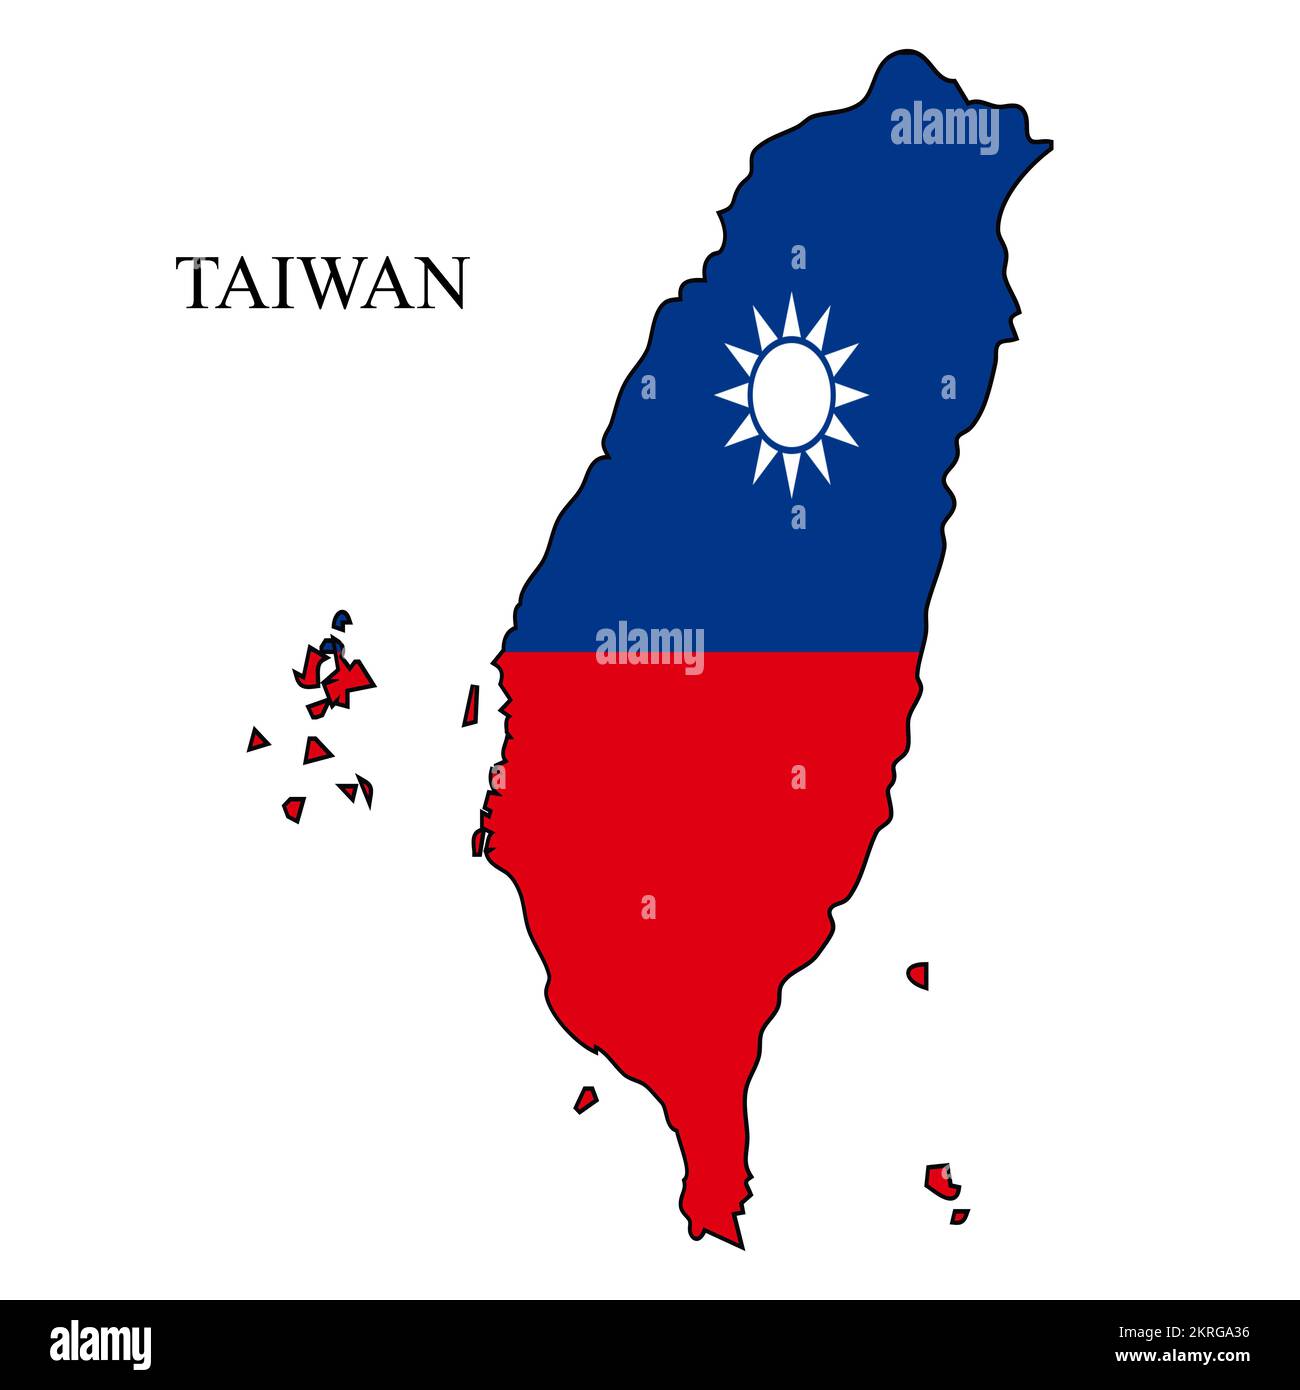 Taiwan map vector illustration. Global economy. Famous country. China Region. Stock Vector